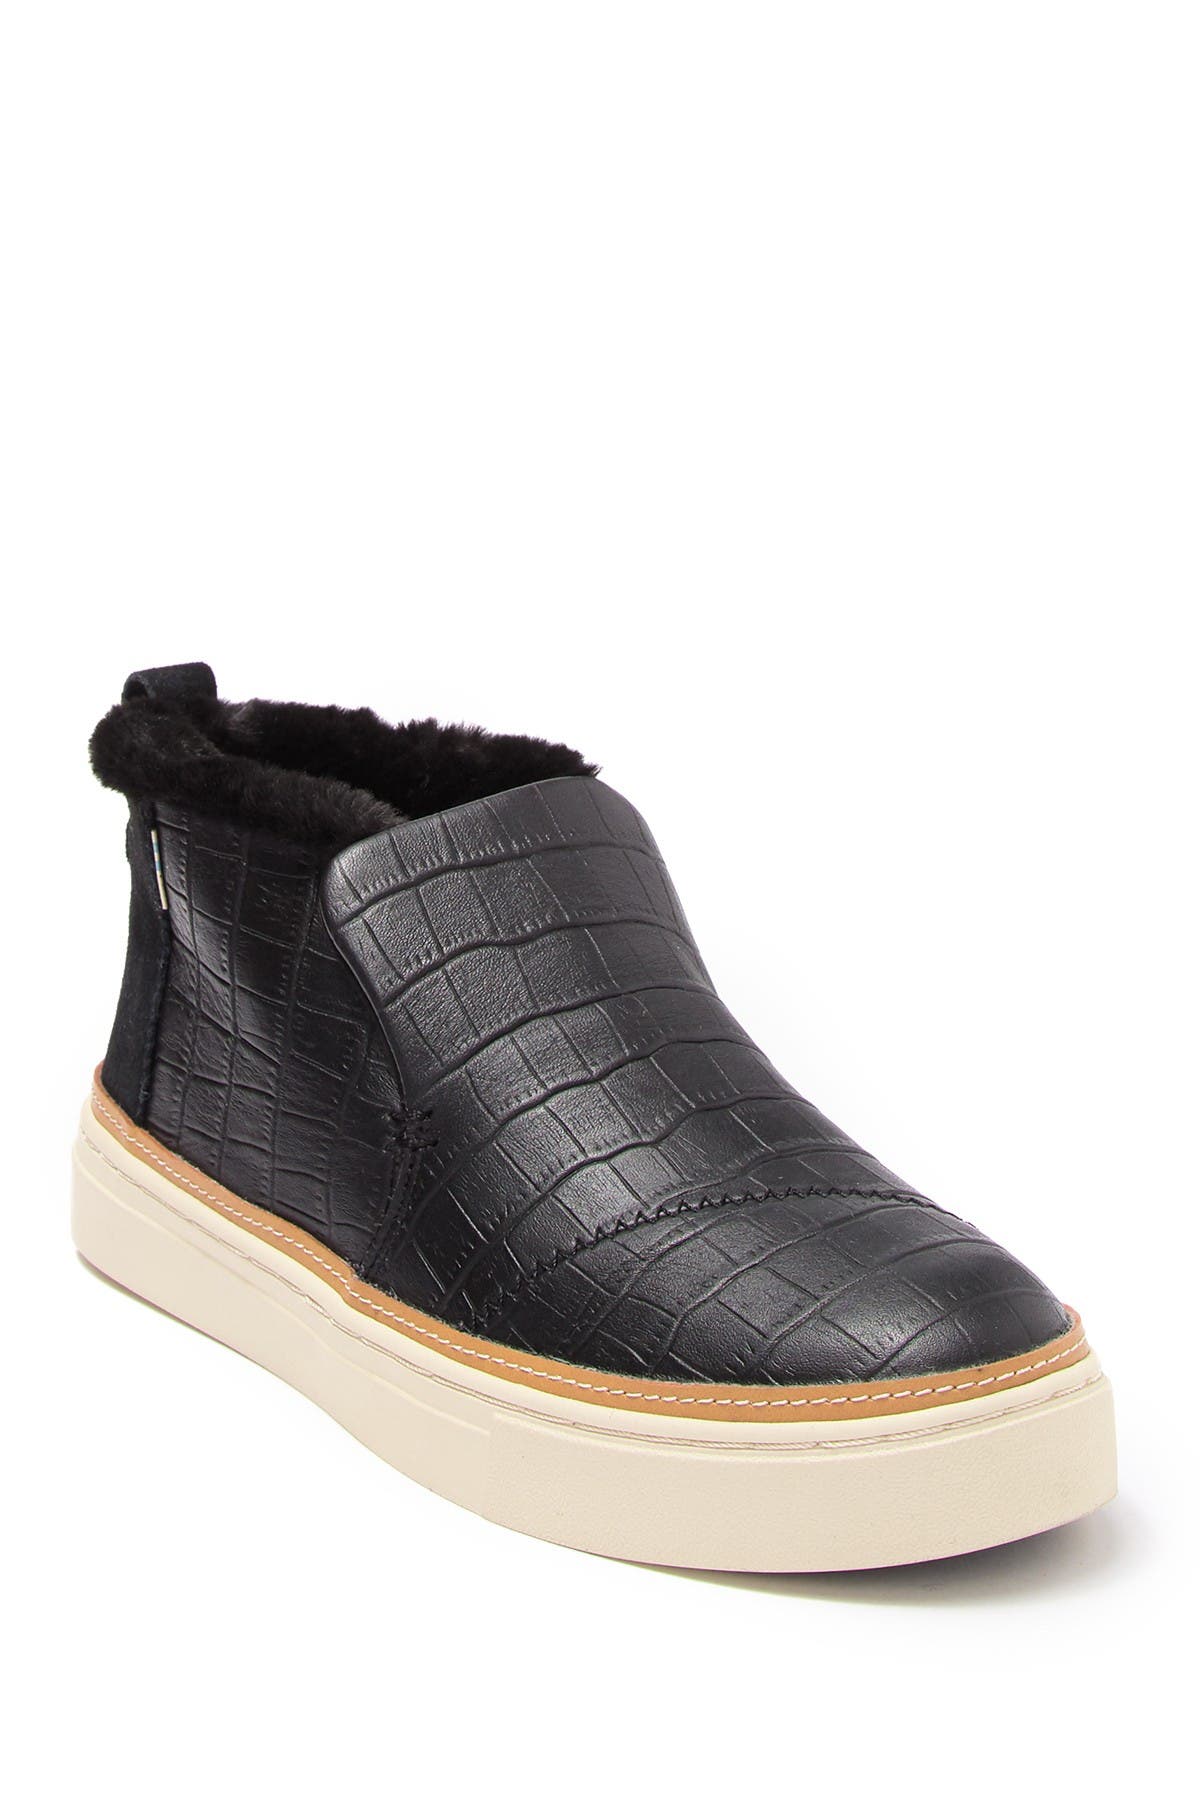 TOMS | Paxton Leather Croc Embossed 